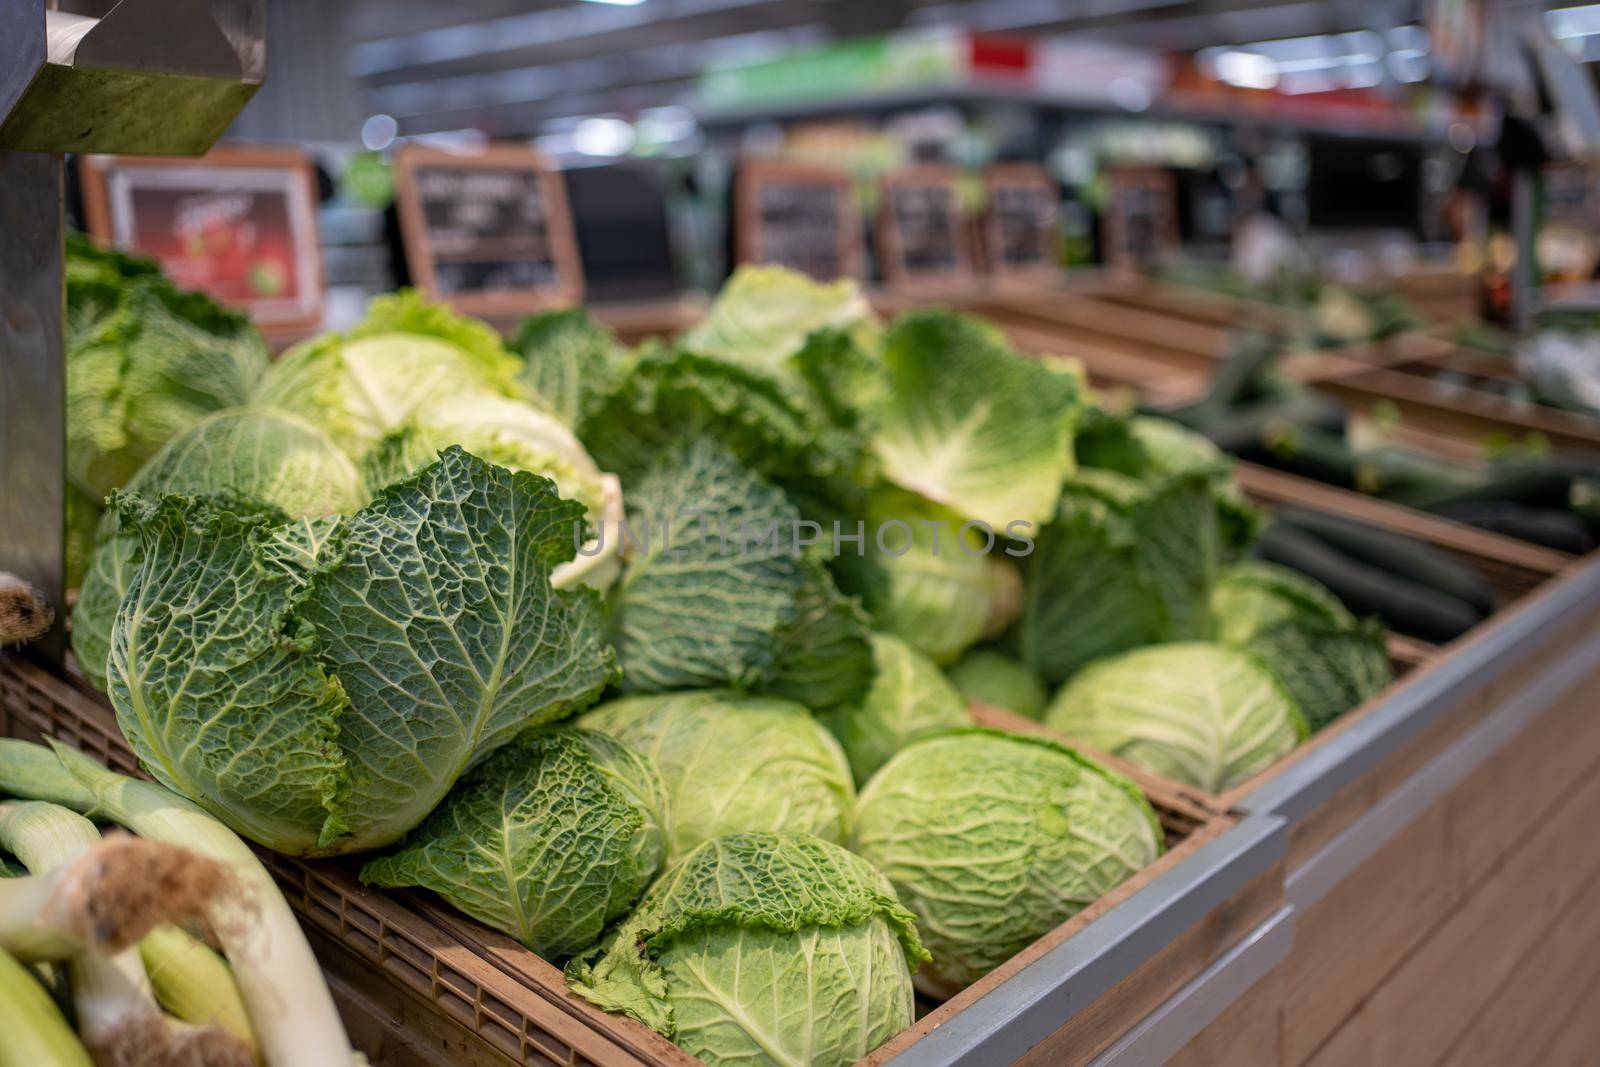 Raw juicy cabbage in plastic basket on the shelf in the supermarket. Green cabbage on grocery store display